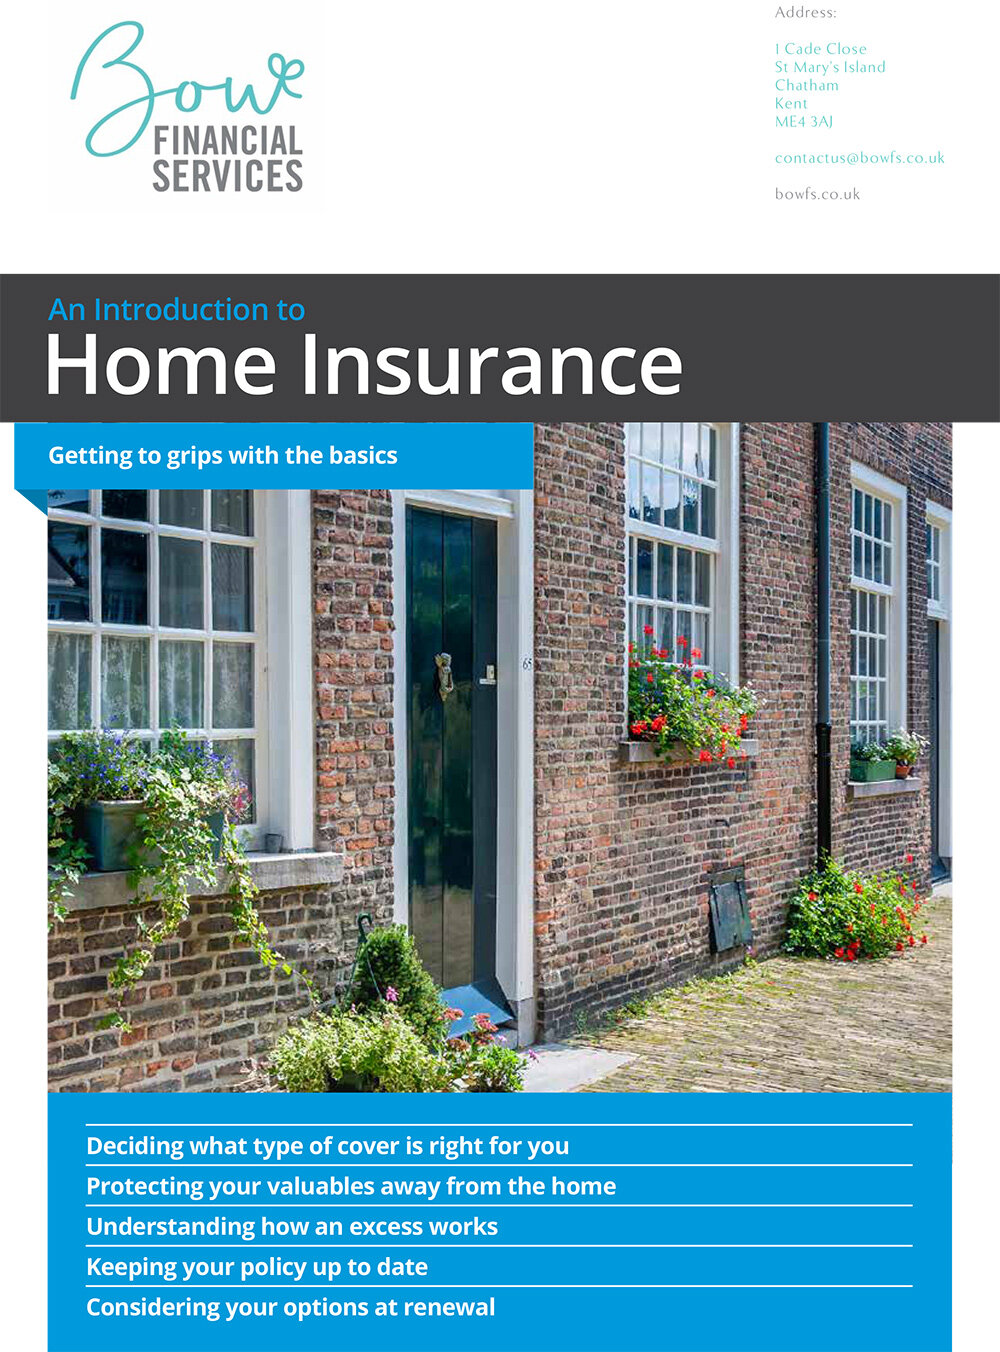 An-Introduction-to-Home-Insurance---January-2020-2.jpg